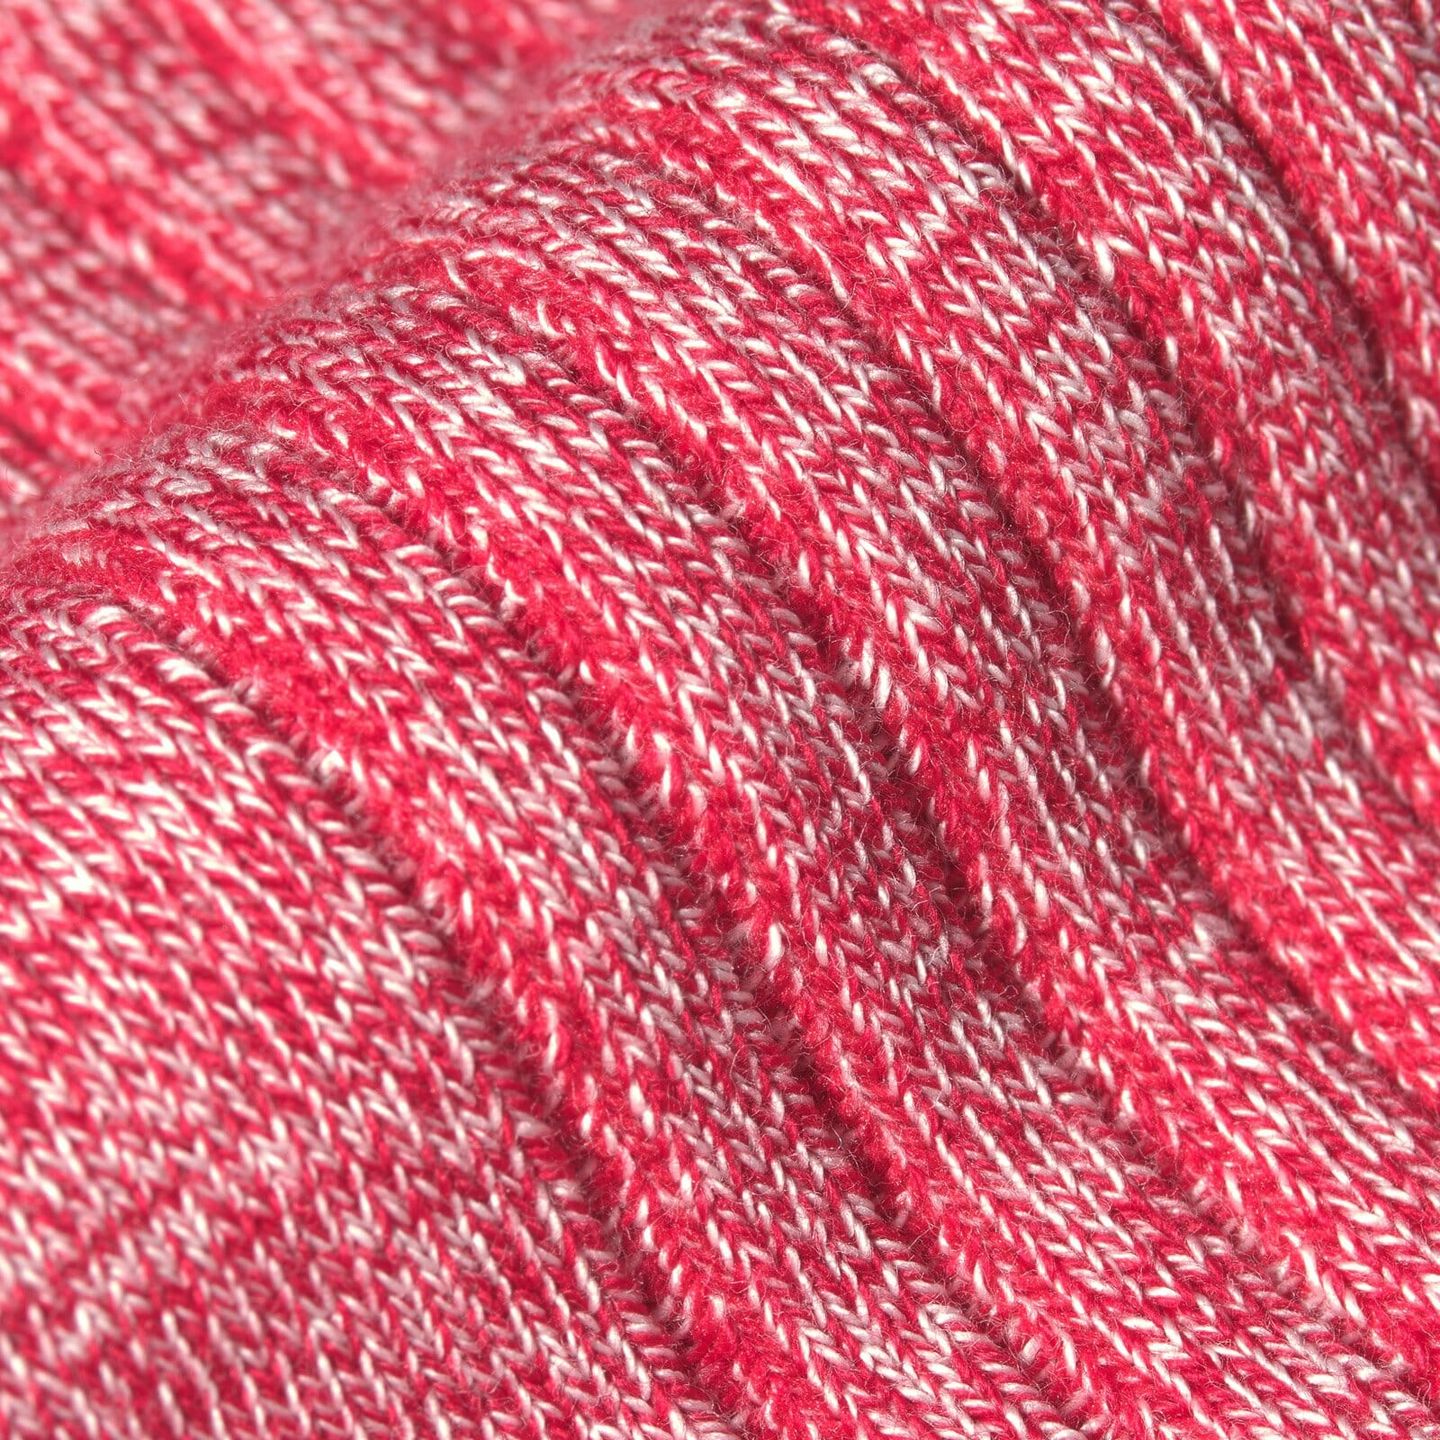 A close up of a red socks pattern